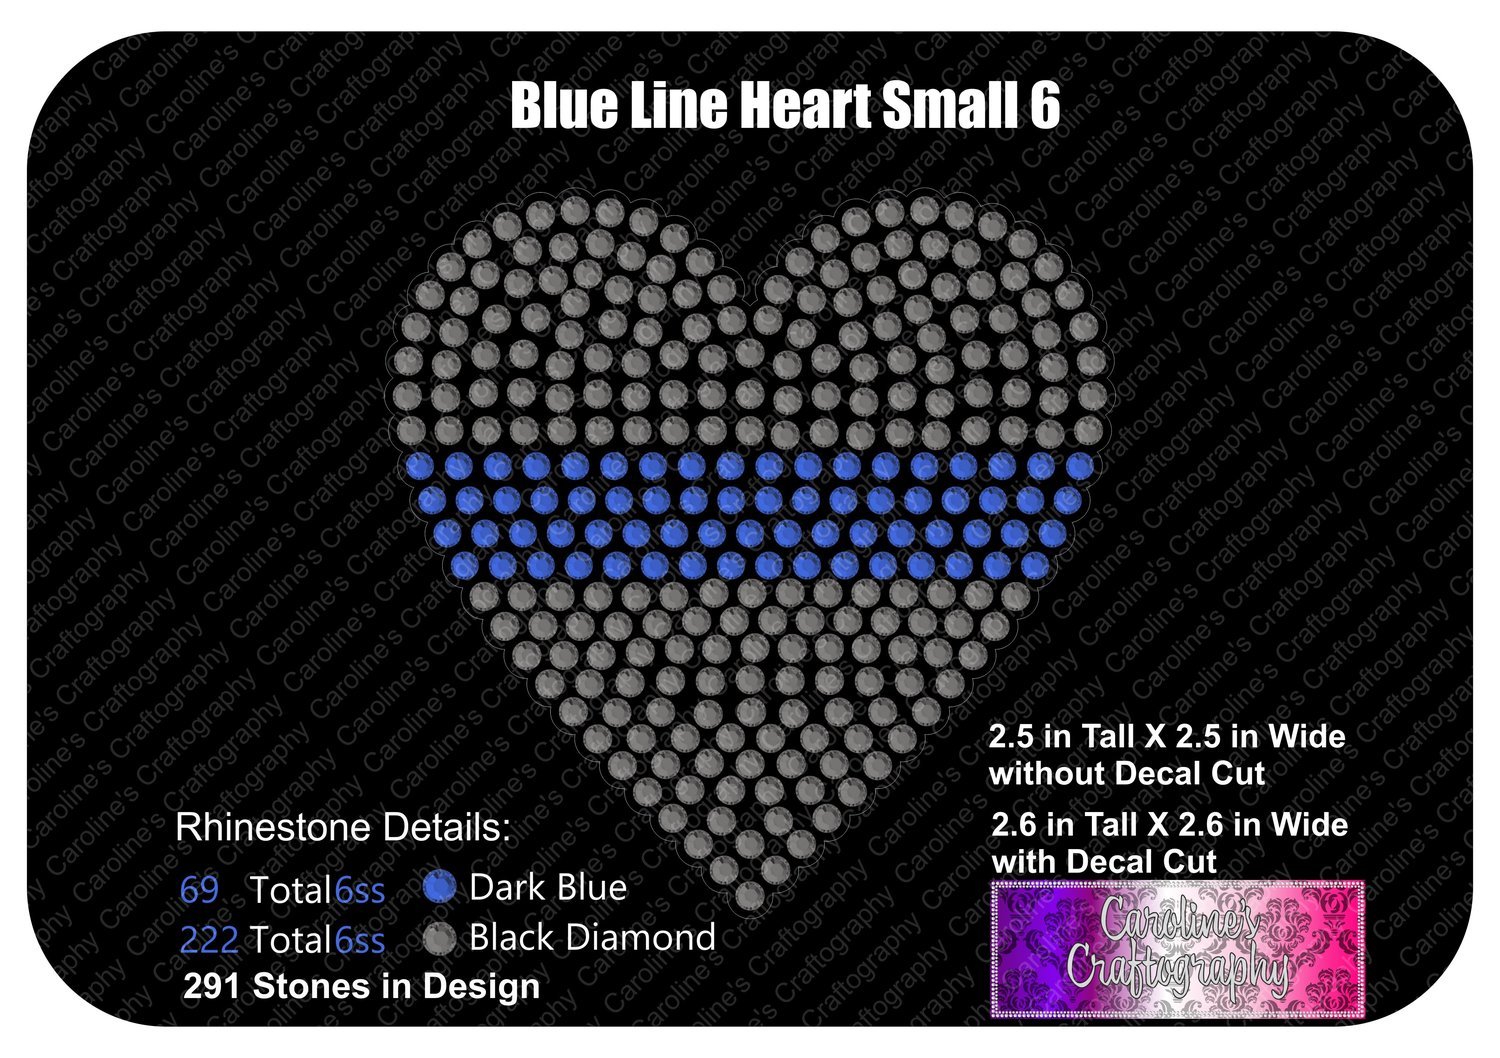 Blue Line Heart Stone Decal Small 6